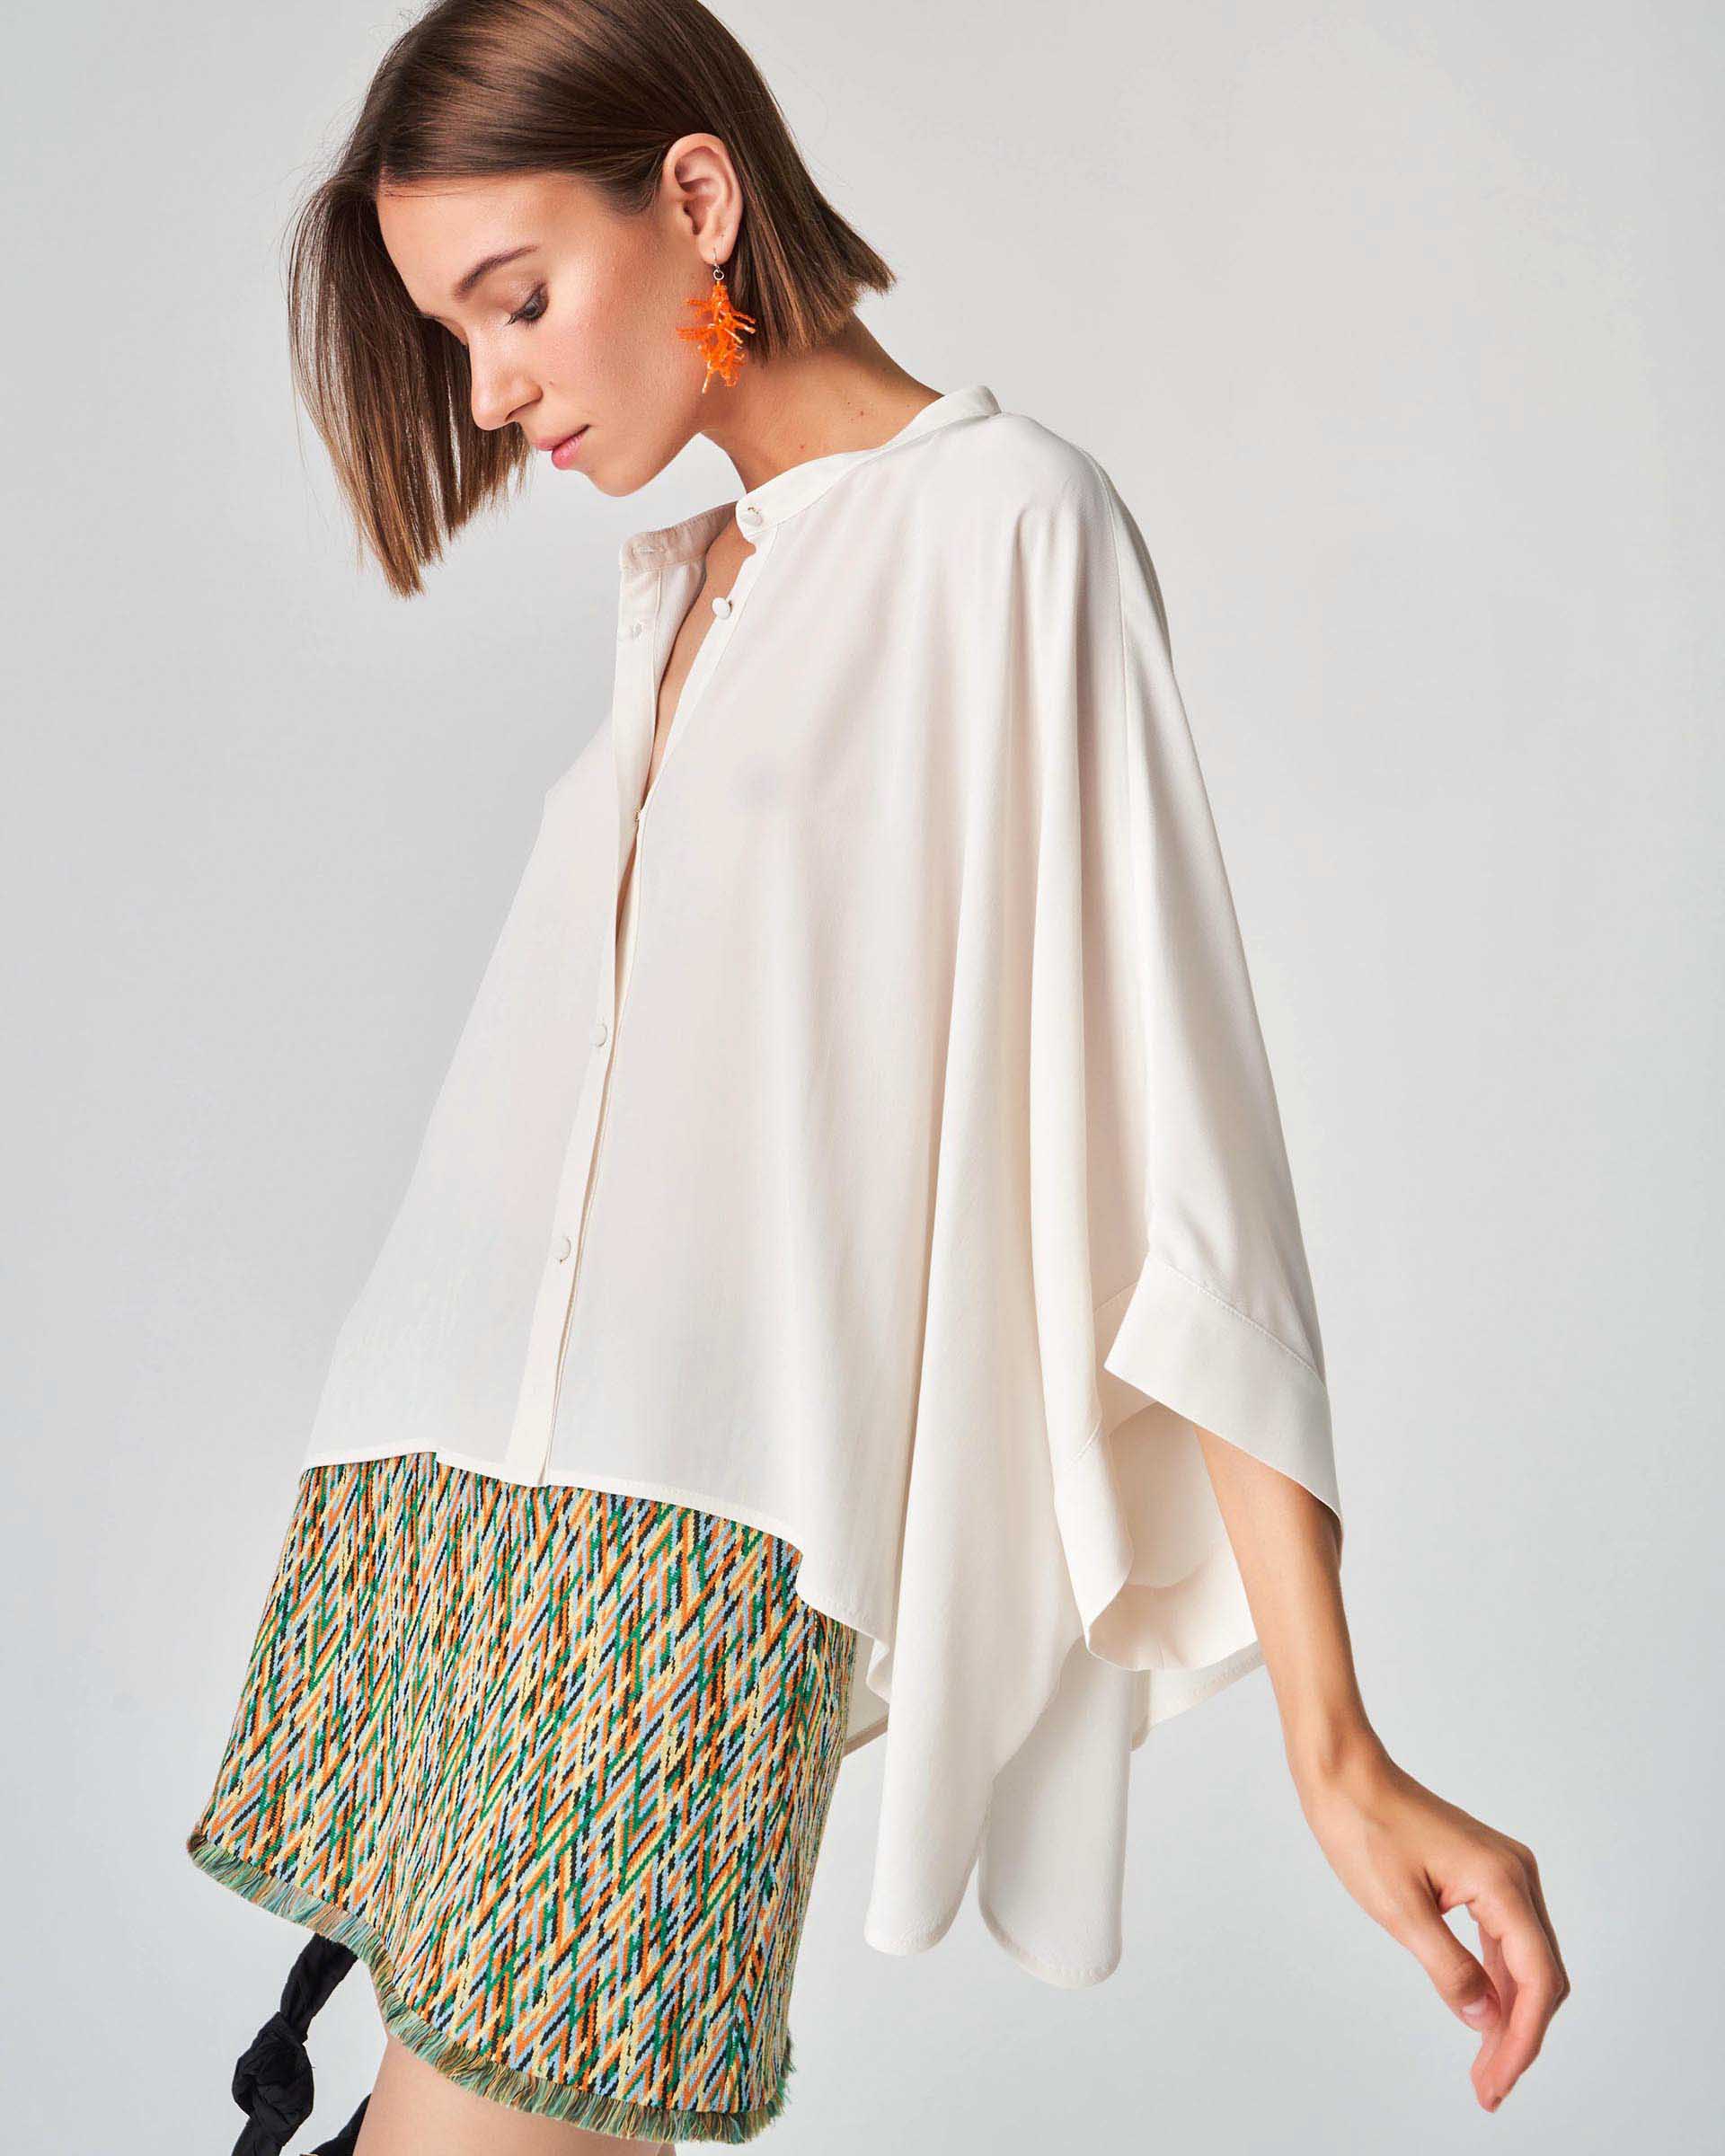 The Market Store | Over Blouse With Bat Sleeves